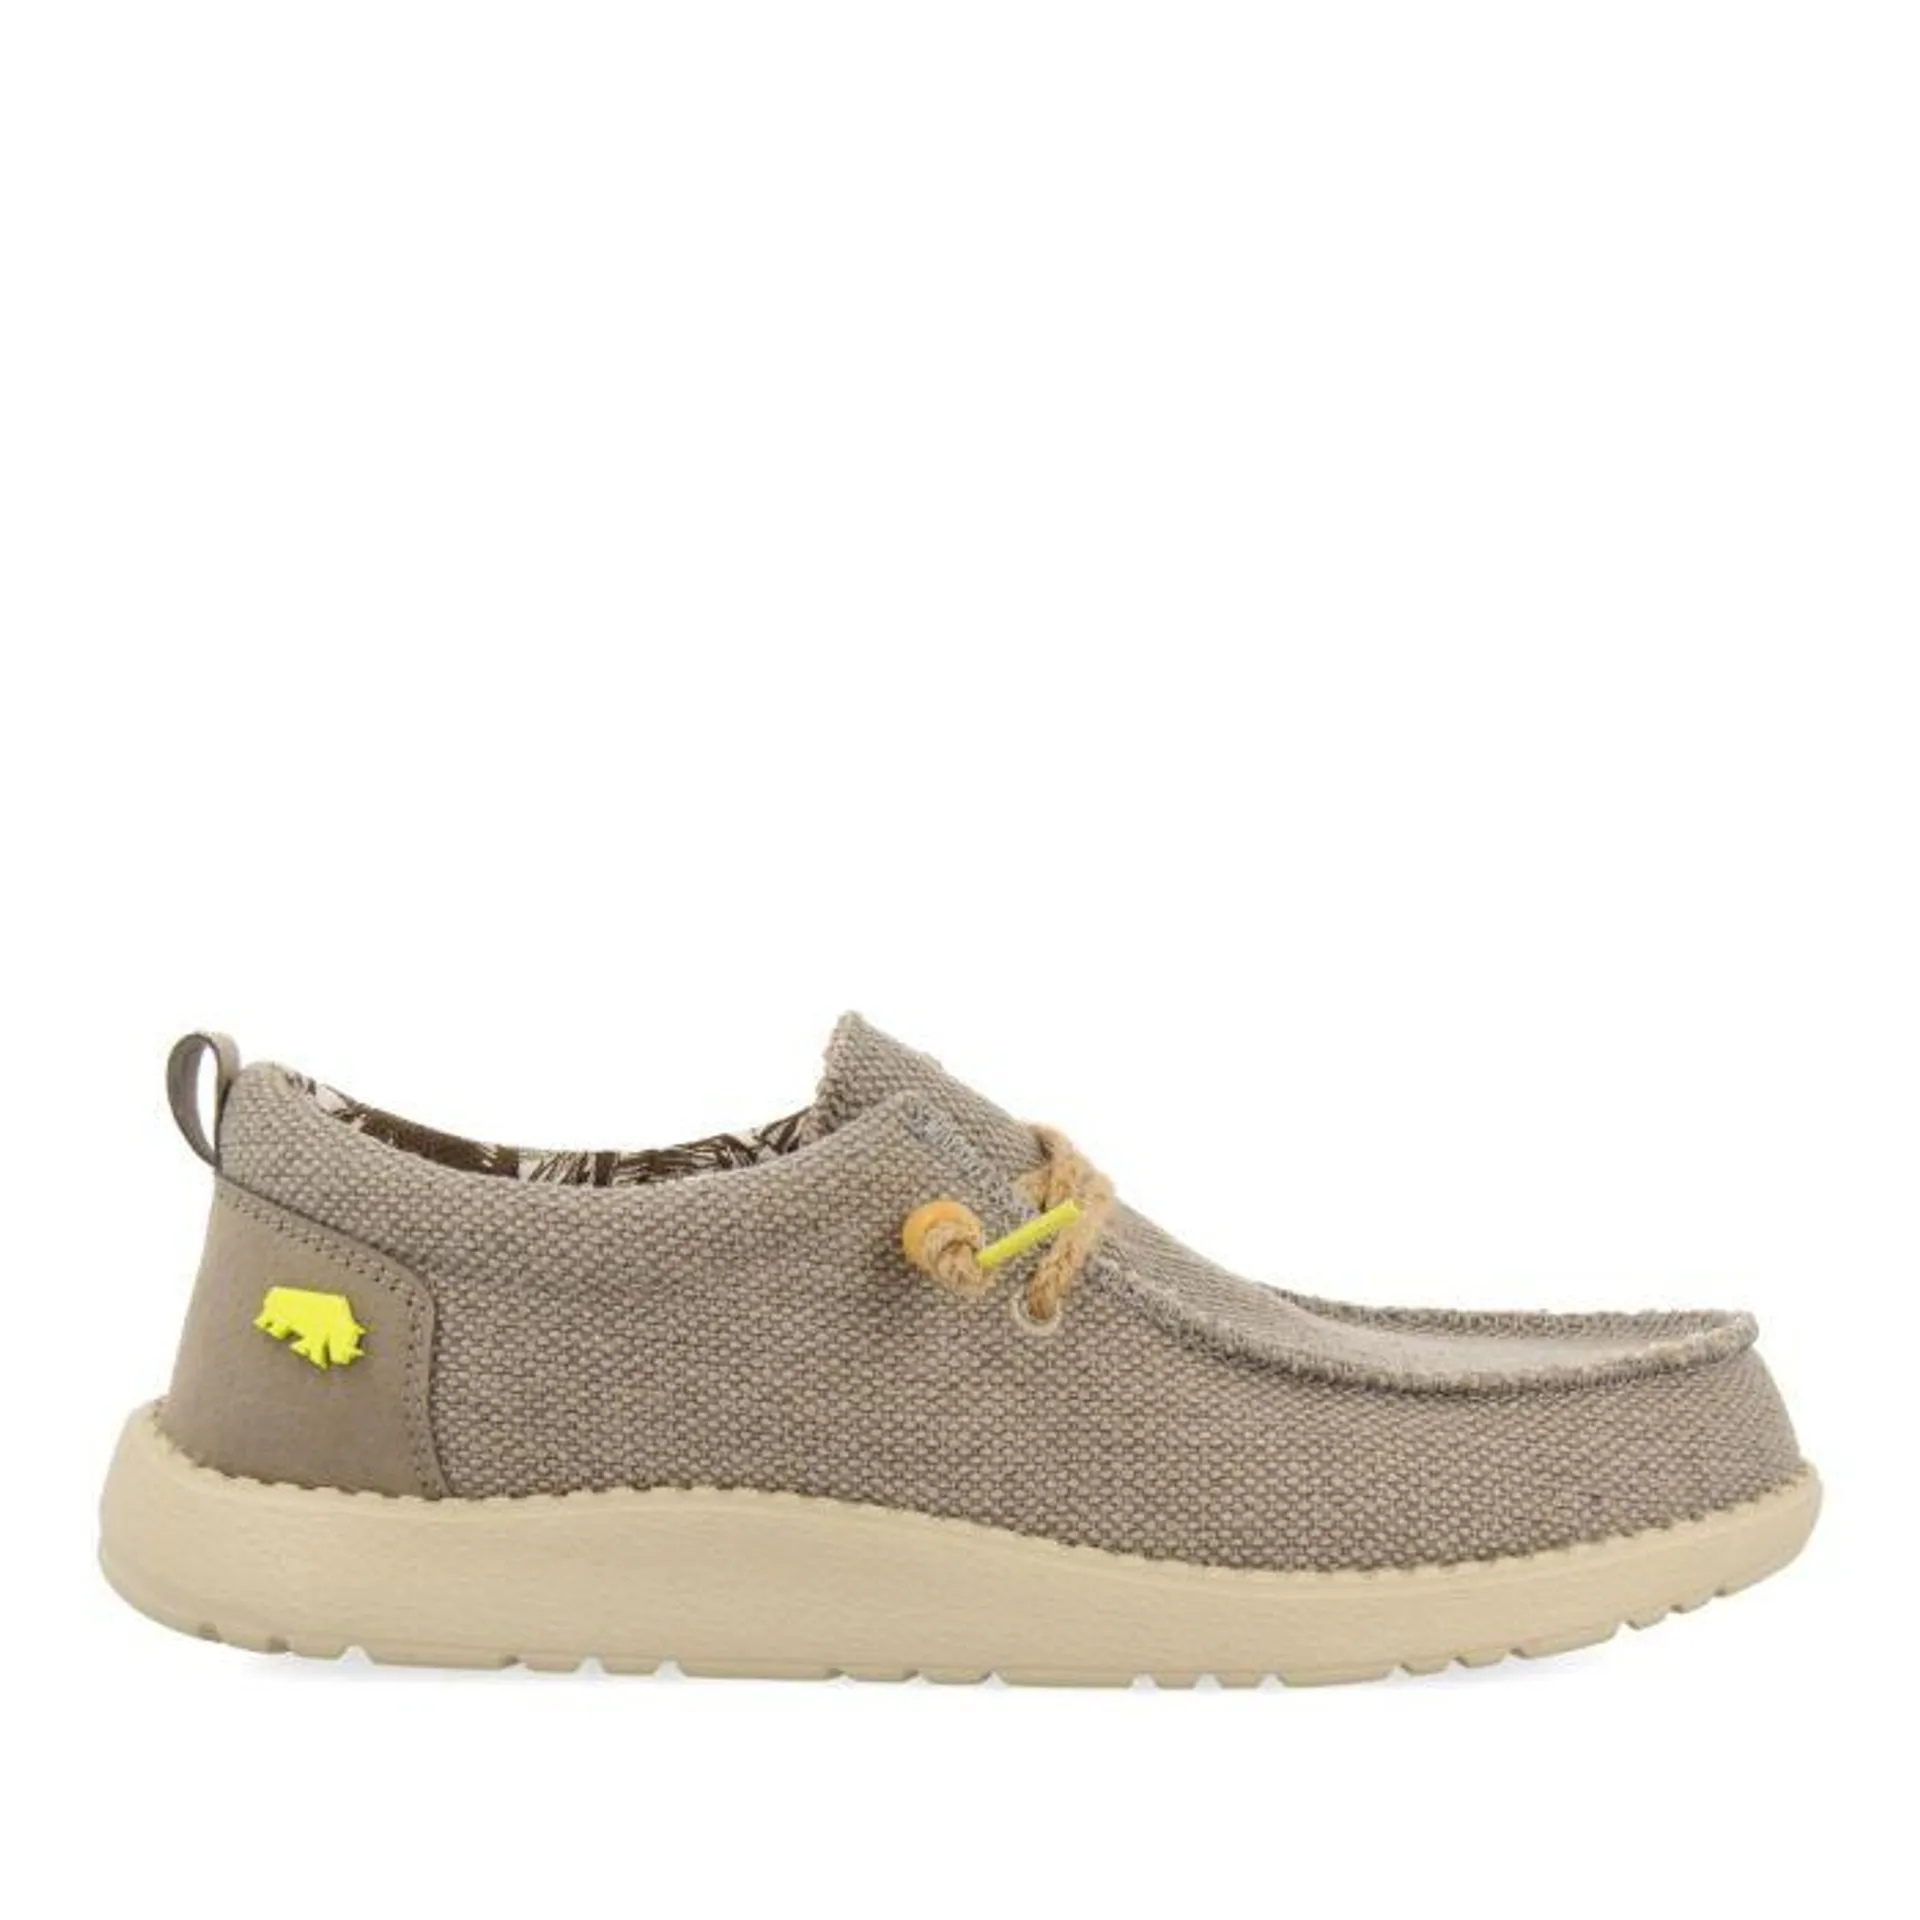 BEIGE COLOR WALLABEE STYLE CANVAS AND JUTE LOAFERS FOR MEN VERNONIA